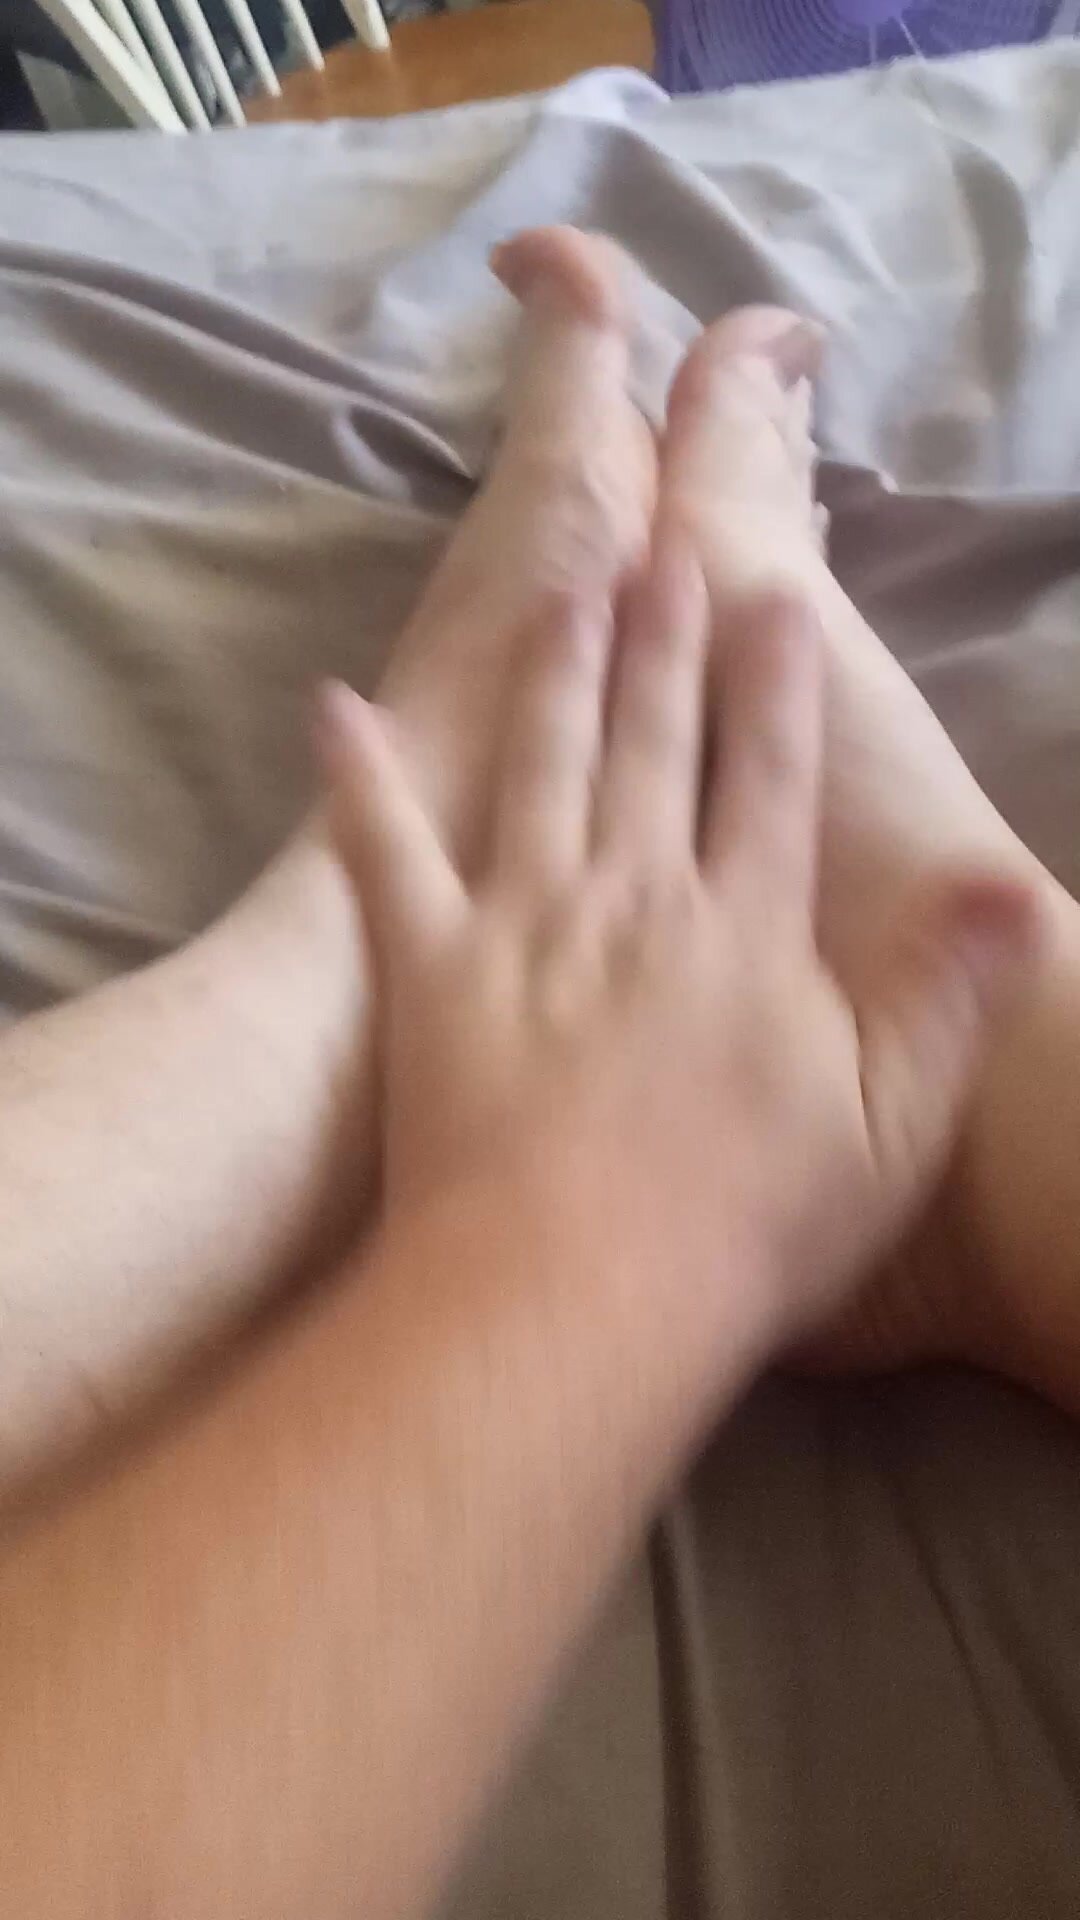 Feet tease and stretch